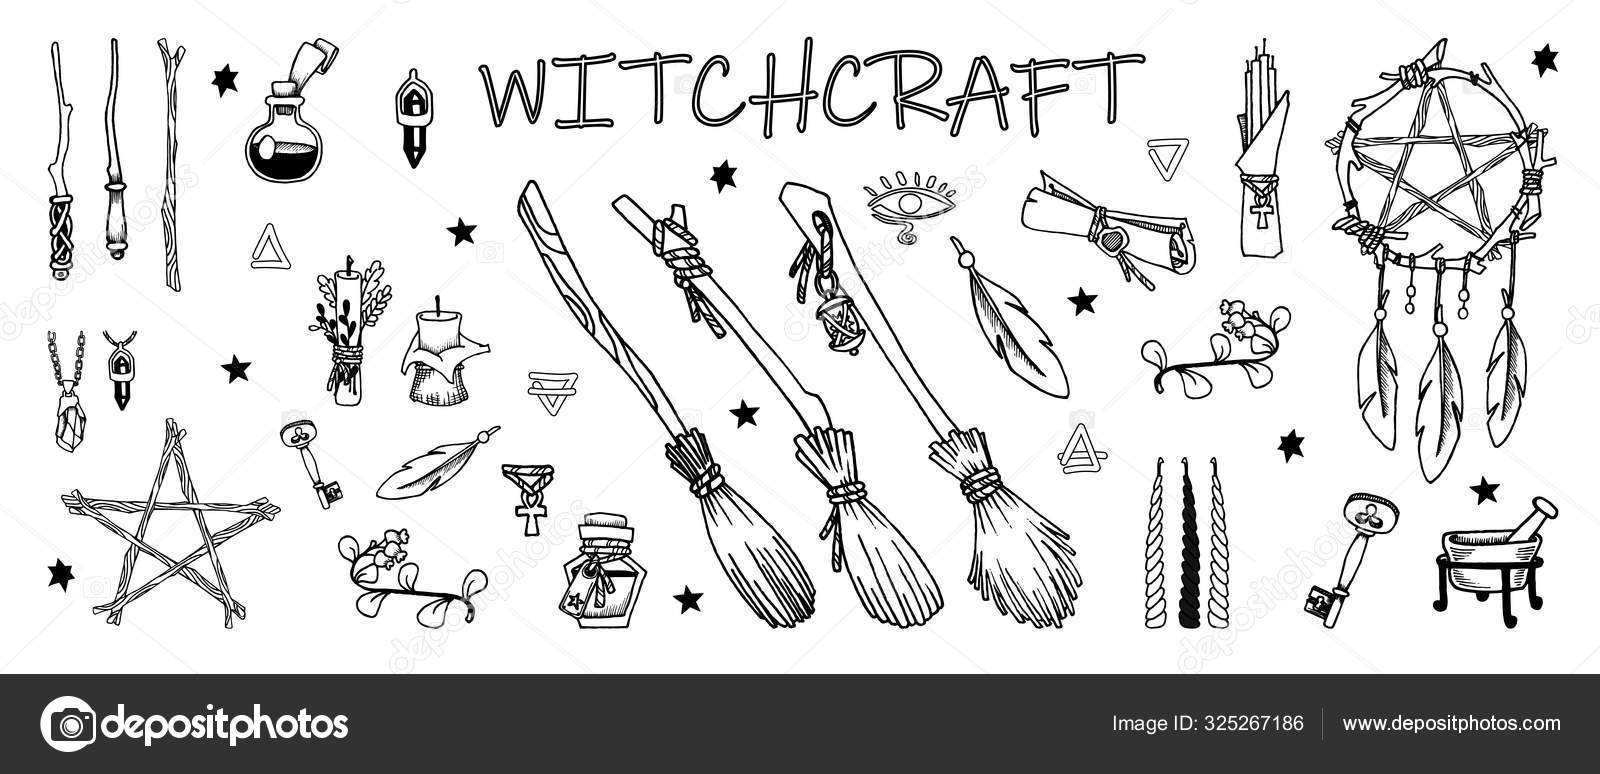 witchcraft-wicca-pagan-tradition-magical